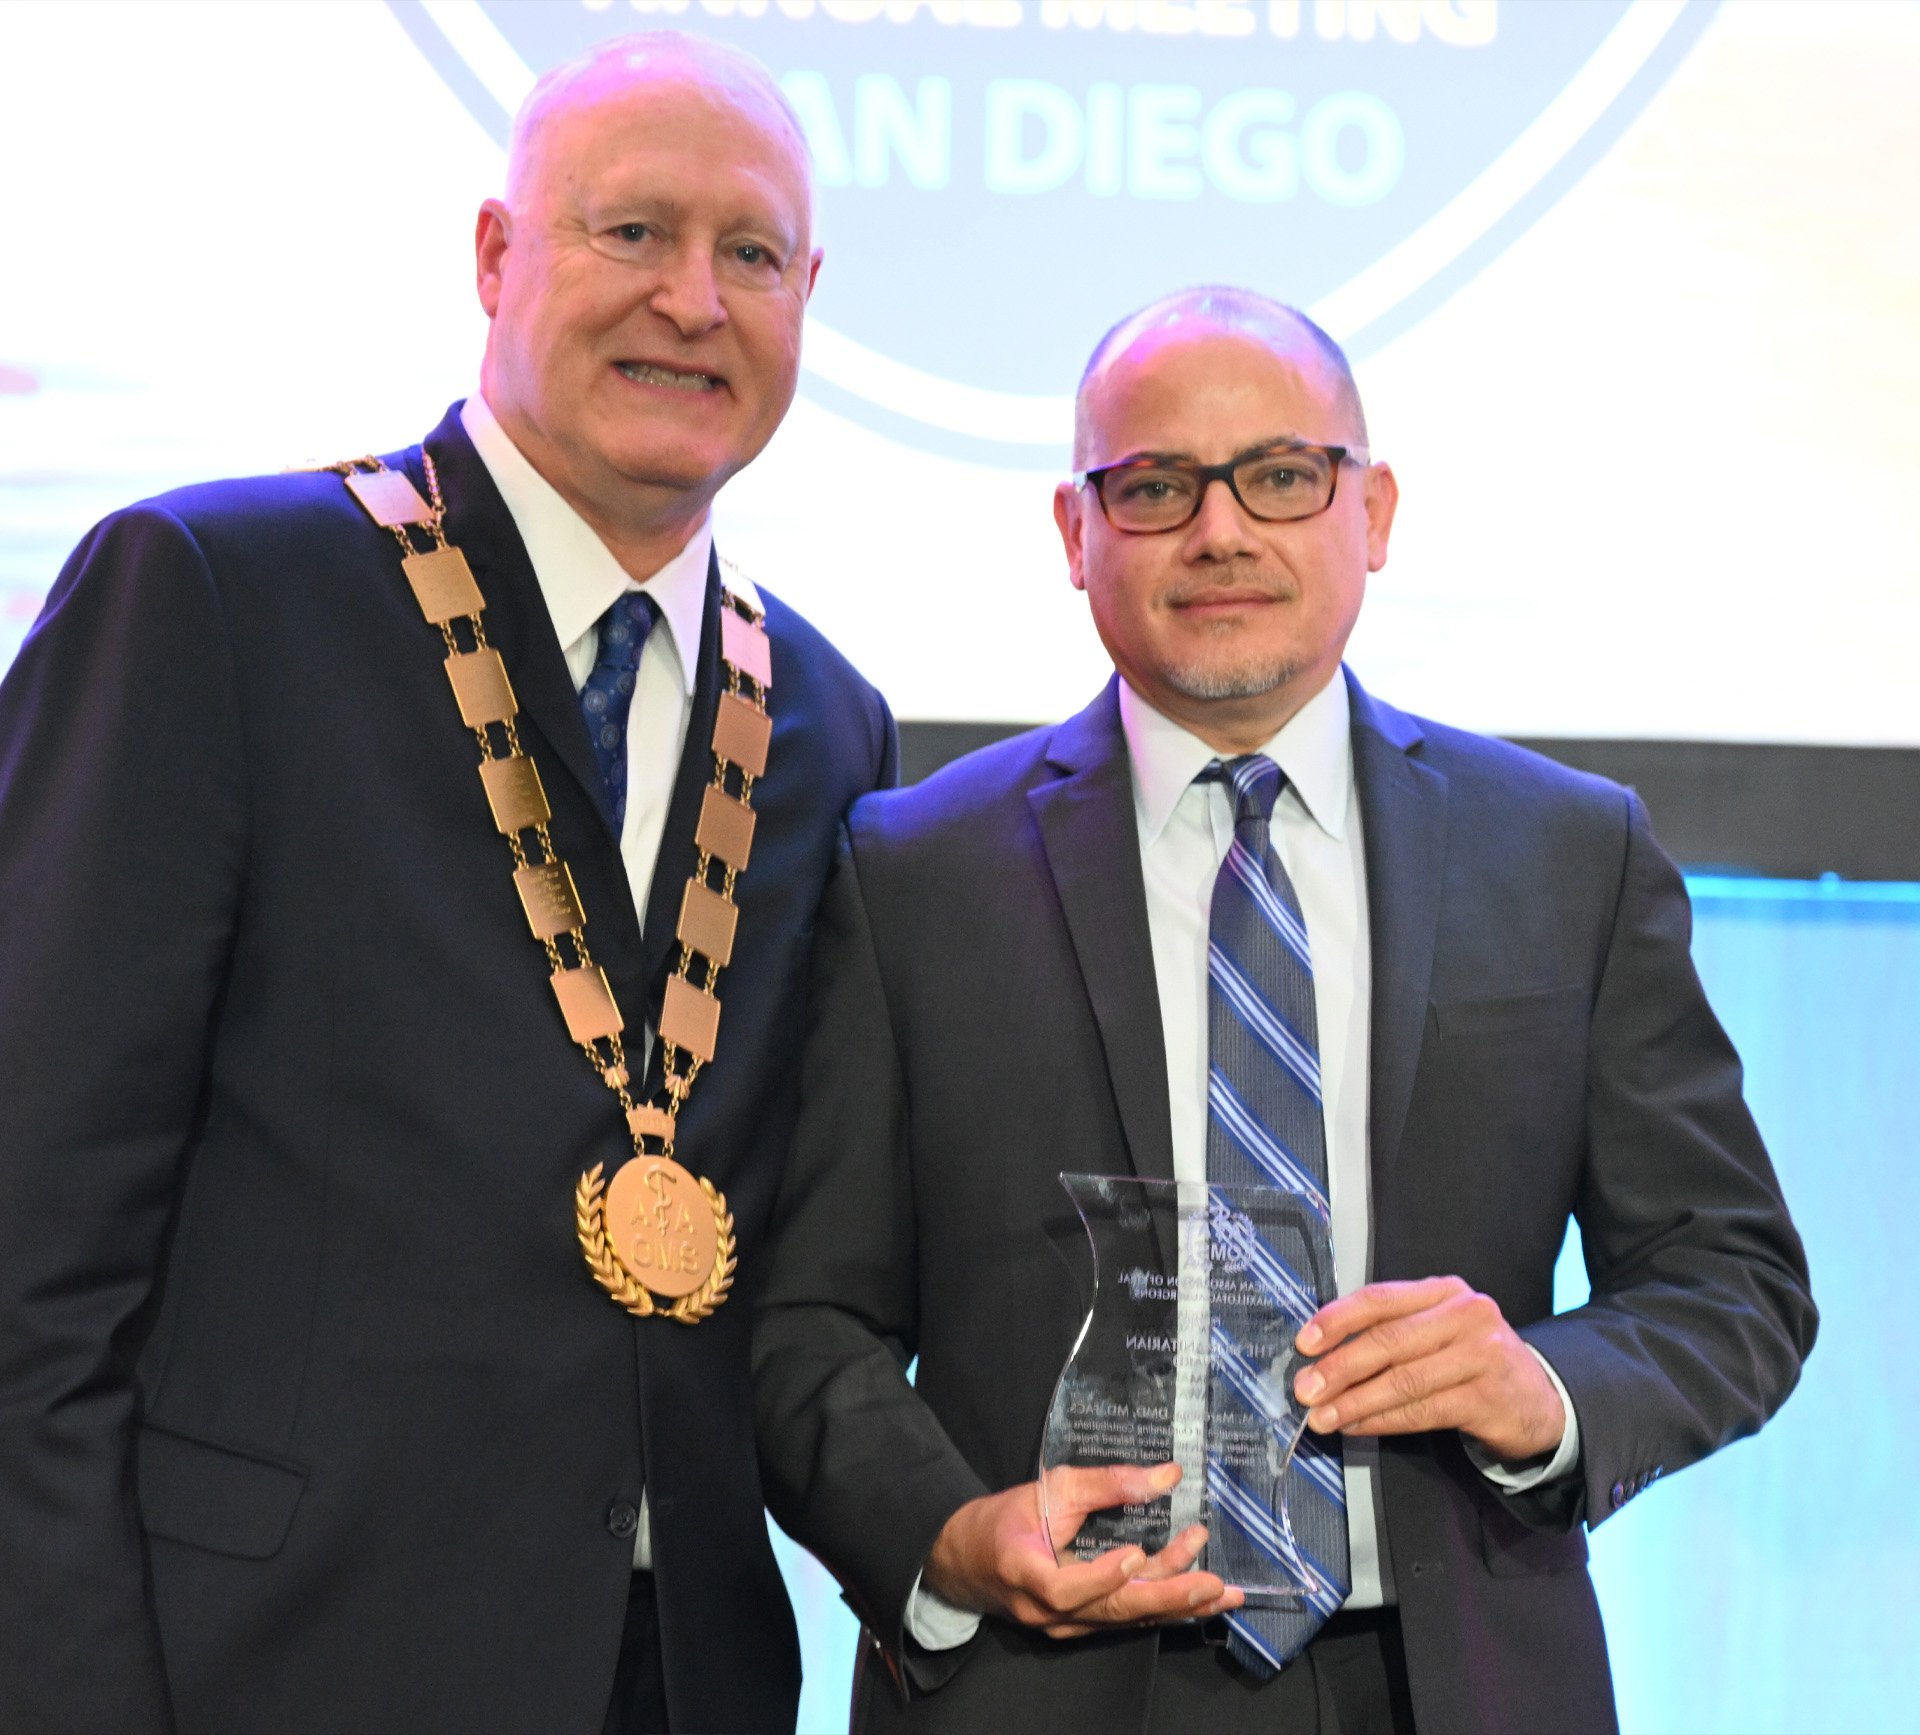 Dr. Jose M. Marchena (right) presented the 2023 Humanitarian Award for Fellows and Members by American Association for Oral and Maxillofacial Surgeons 2022-23 President, Dr. Paul J. Schwartz. Photo courtesy of AAOMS.